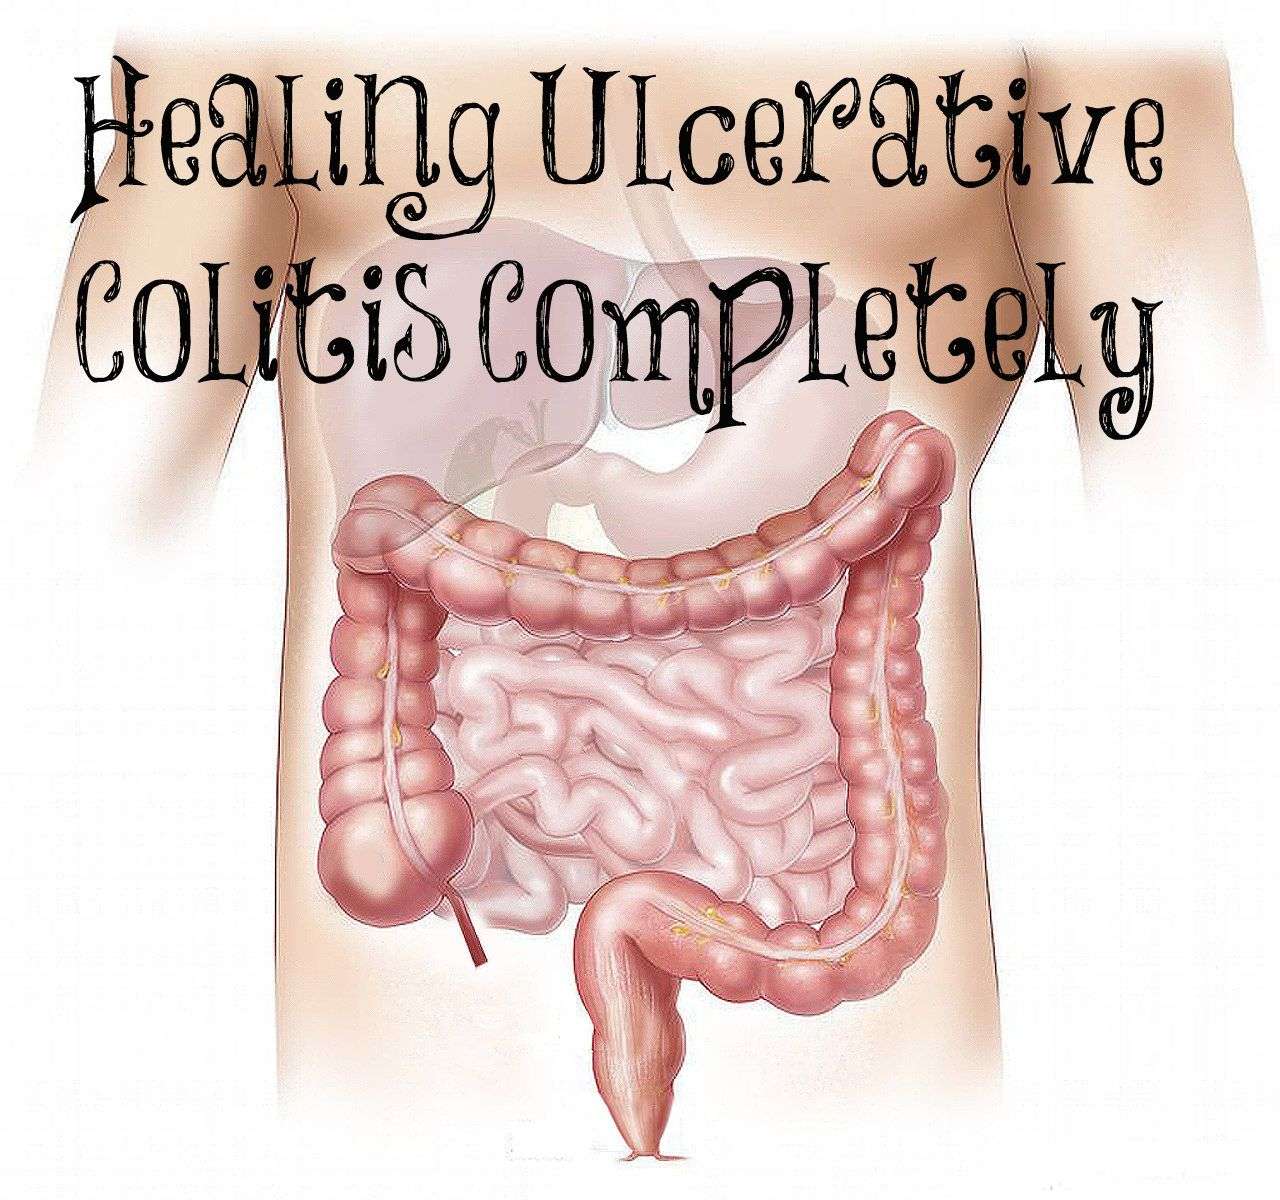 Healing Ulcerative Colitis Completely in 2020